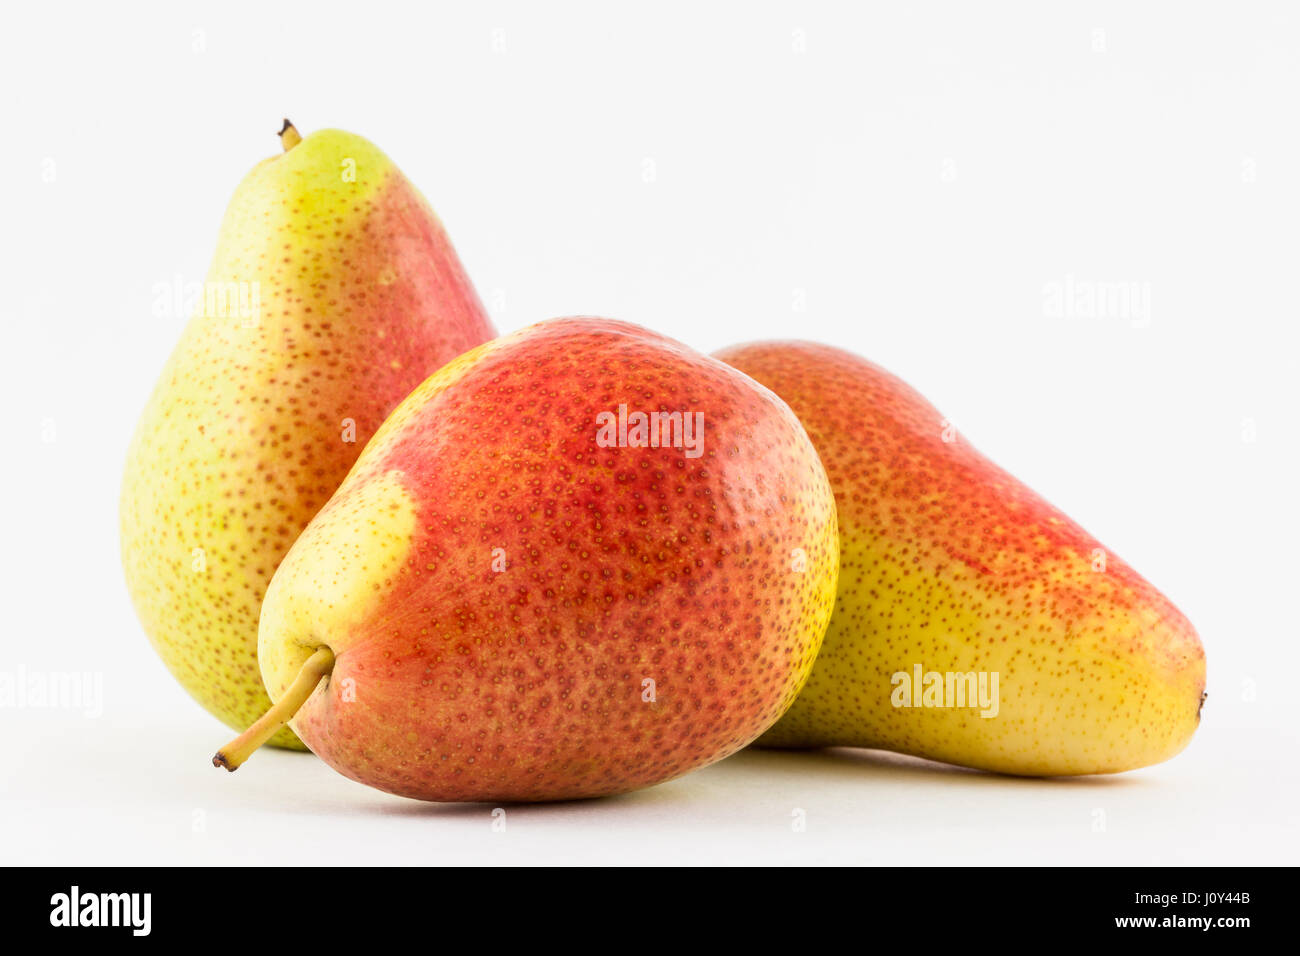 Pear (Pyrus communis) isolated in white background Stock Photo